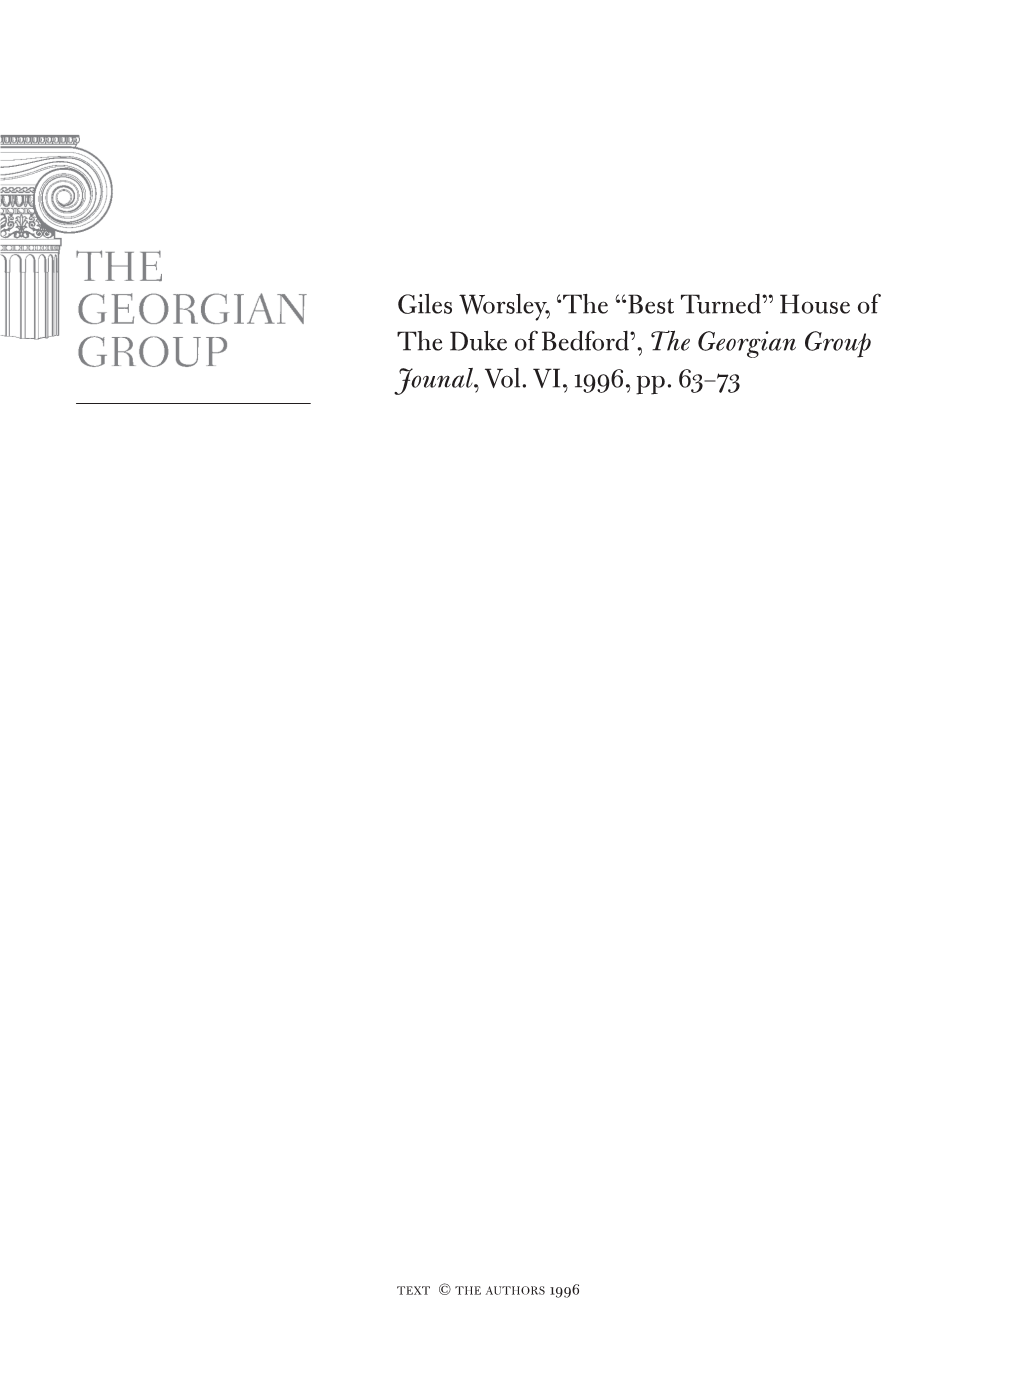 Giles Worsley, 'The “Best Turned” House of the Duke of Bedford', the Georgian Group Jounal, Vol. VI, 1996, Pp. 63–73